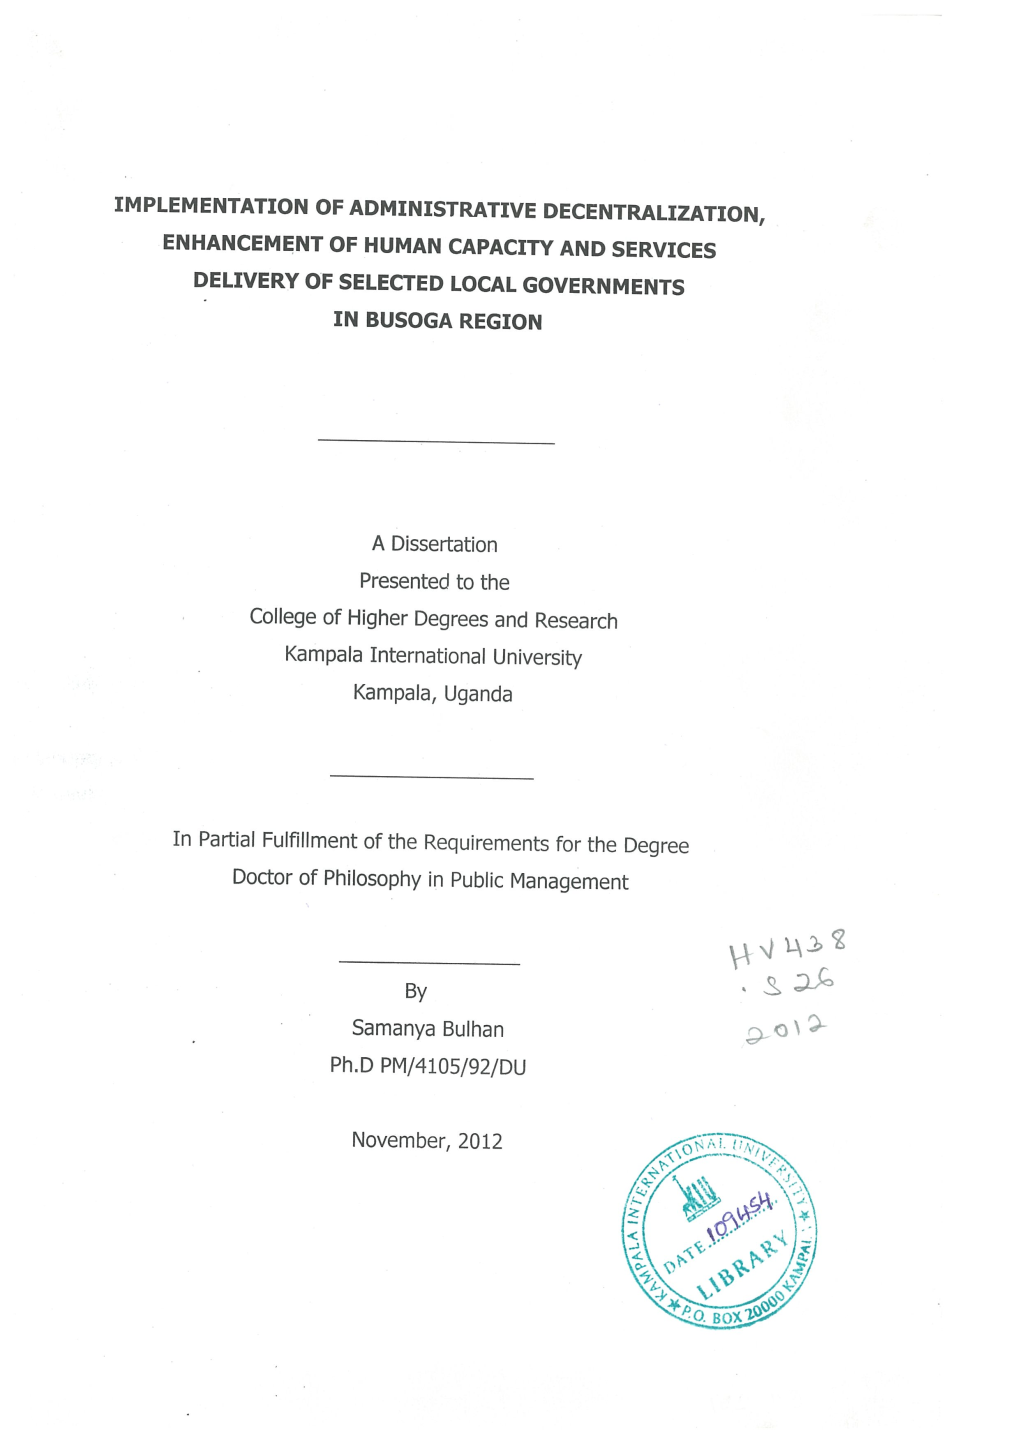 A Dissertation Presented to the College of Higher Degrees and Research Kampala International University Kampala, Uganda